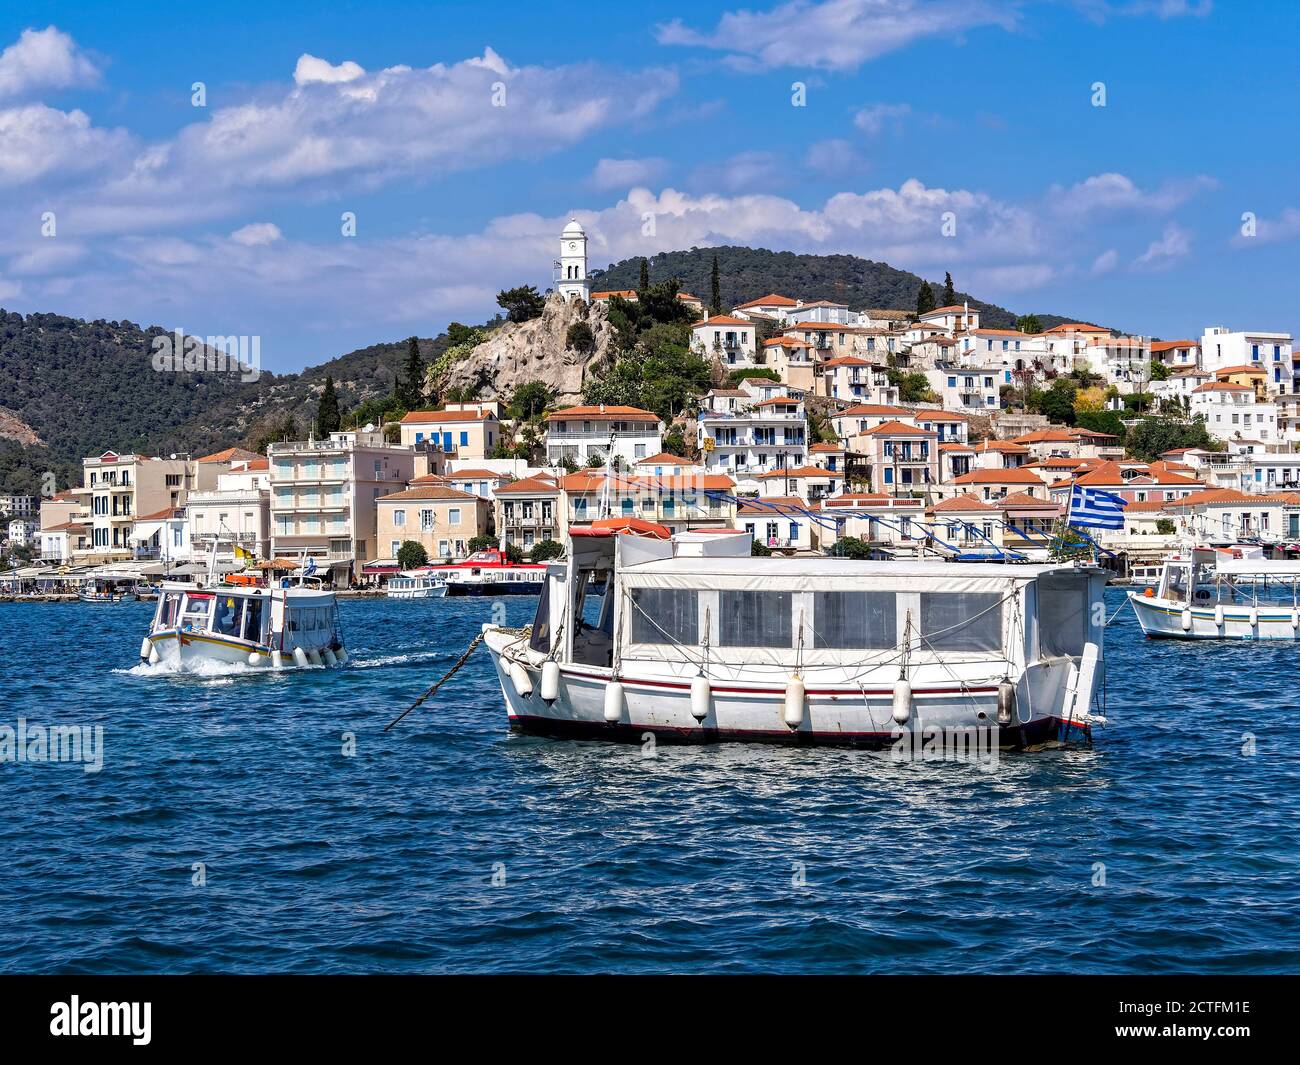 The American writer Henry Miller (1891–1980) wrote about Poros in 'The Colossus of Maroussi', considered his best book written about Poros ...'I don't Stock Photo